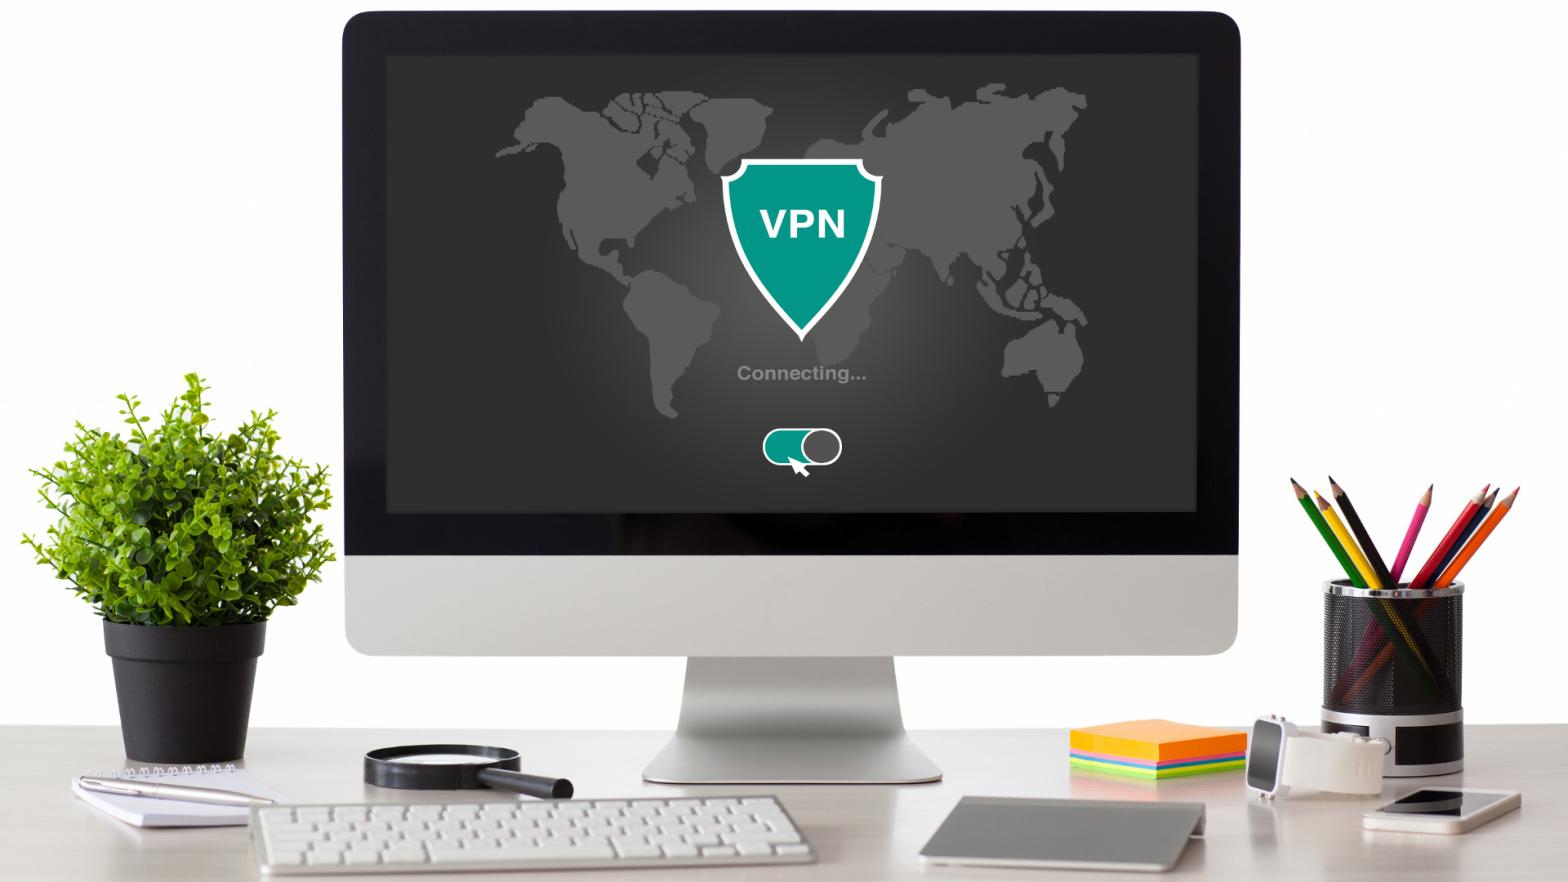 computer with app vpn creation Internet protocols for protection private network